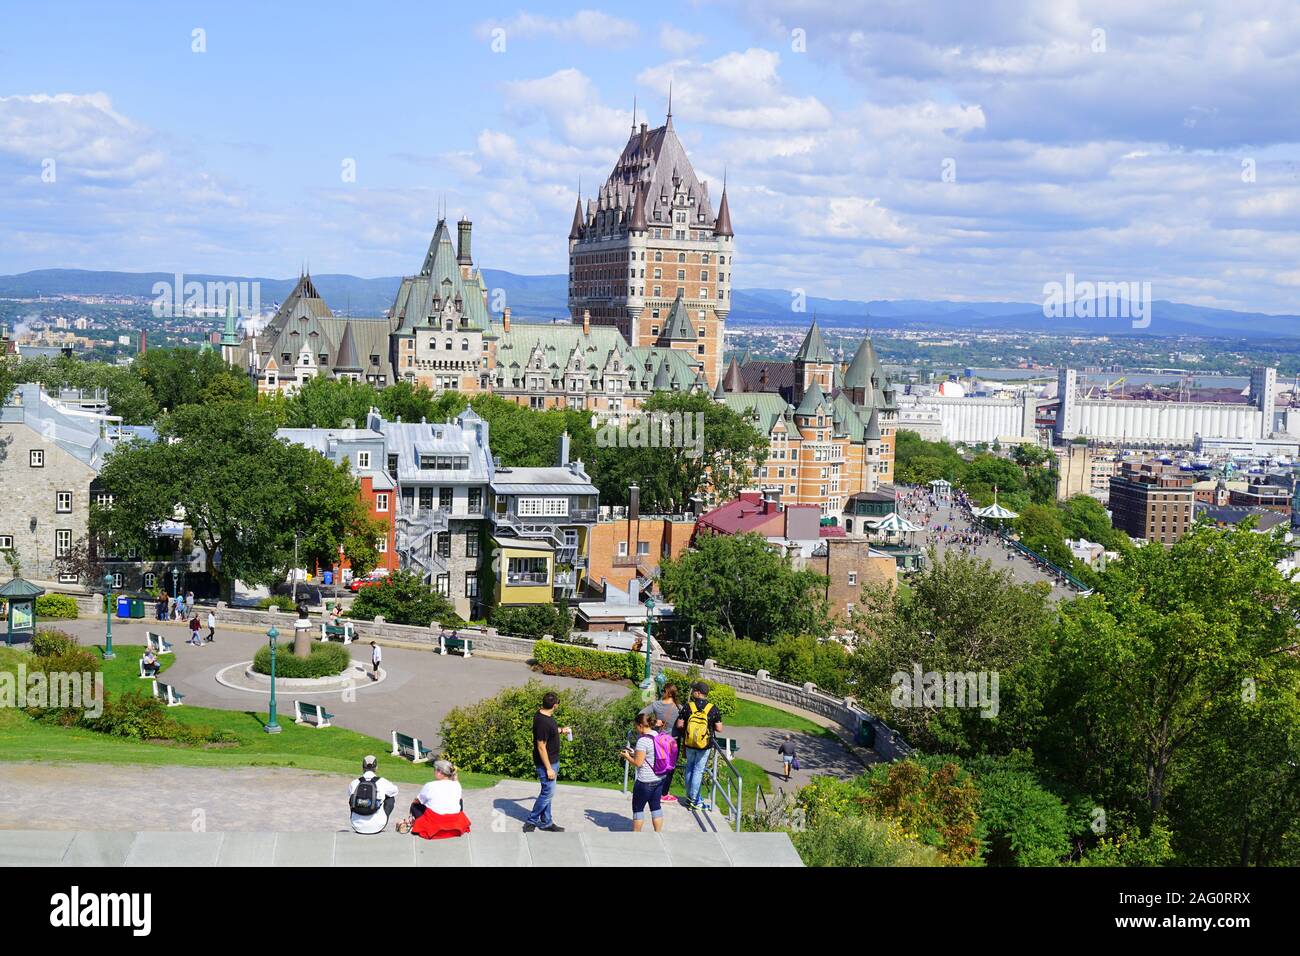 A distant view of The Fairmont Le Château Frontenac from Citadel, Old Quebec, Canada Stock Photo